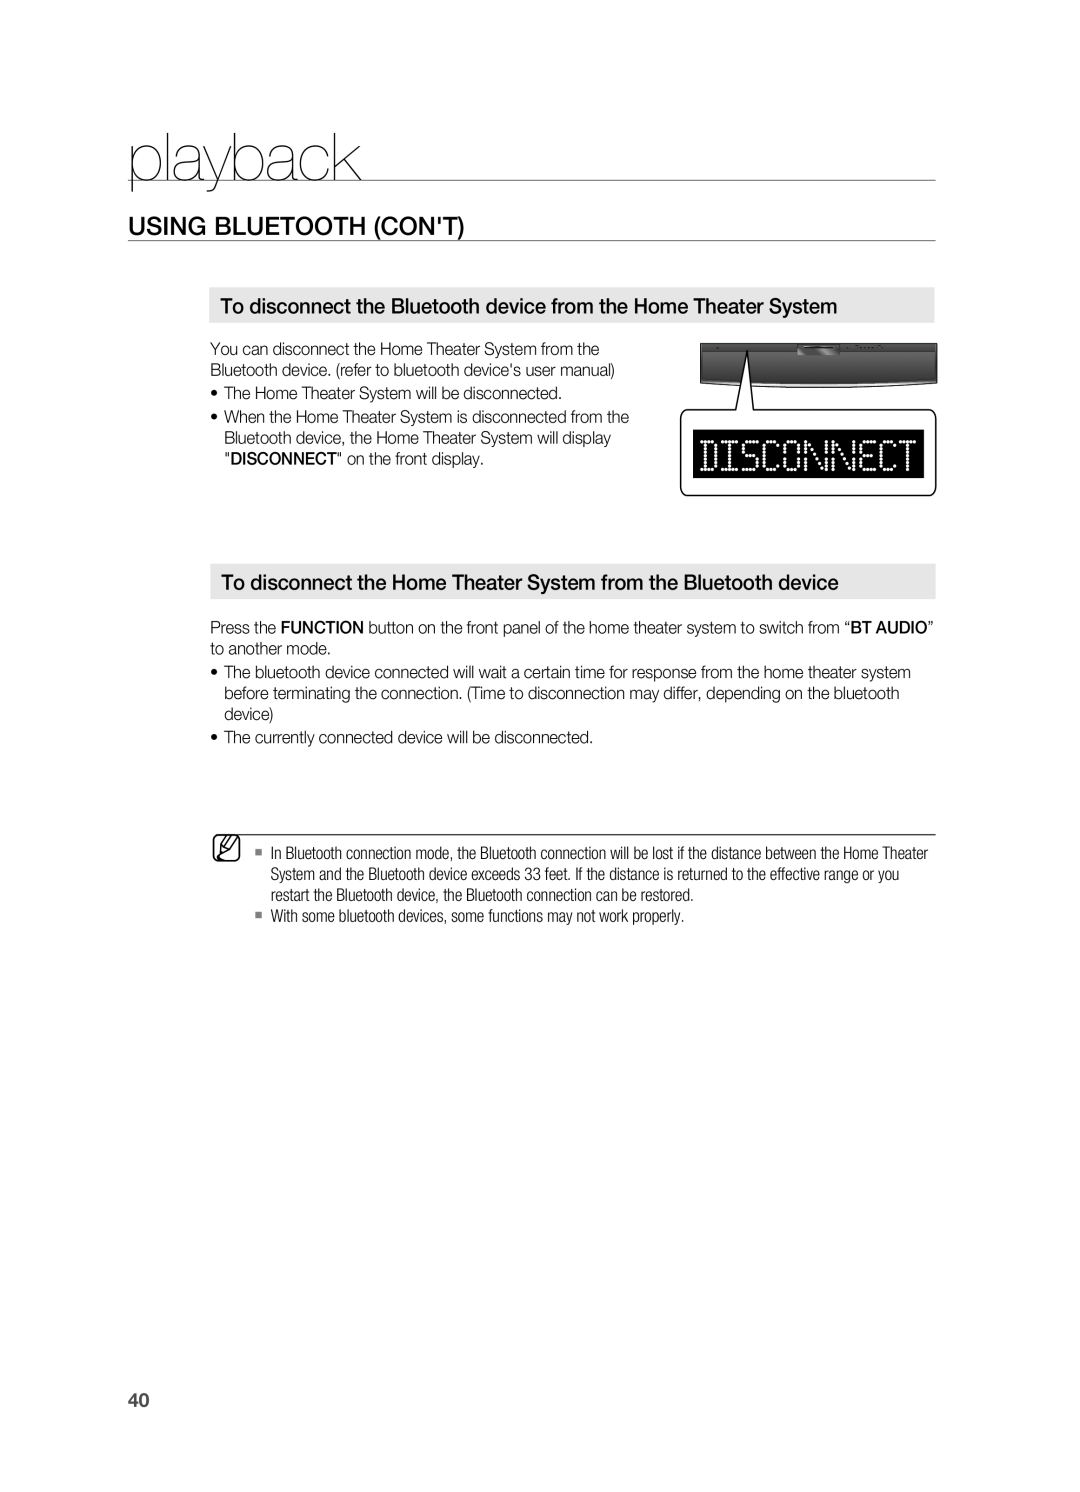 Samsung HT-X810 user manual USING BLUETOOTH cont, playback 